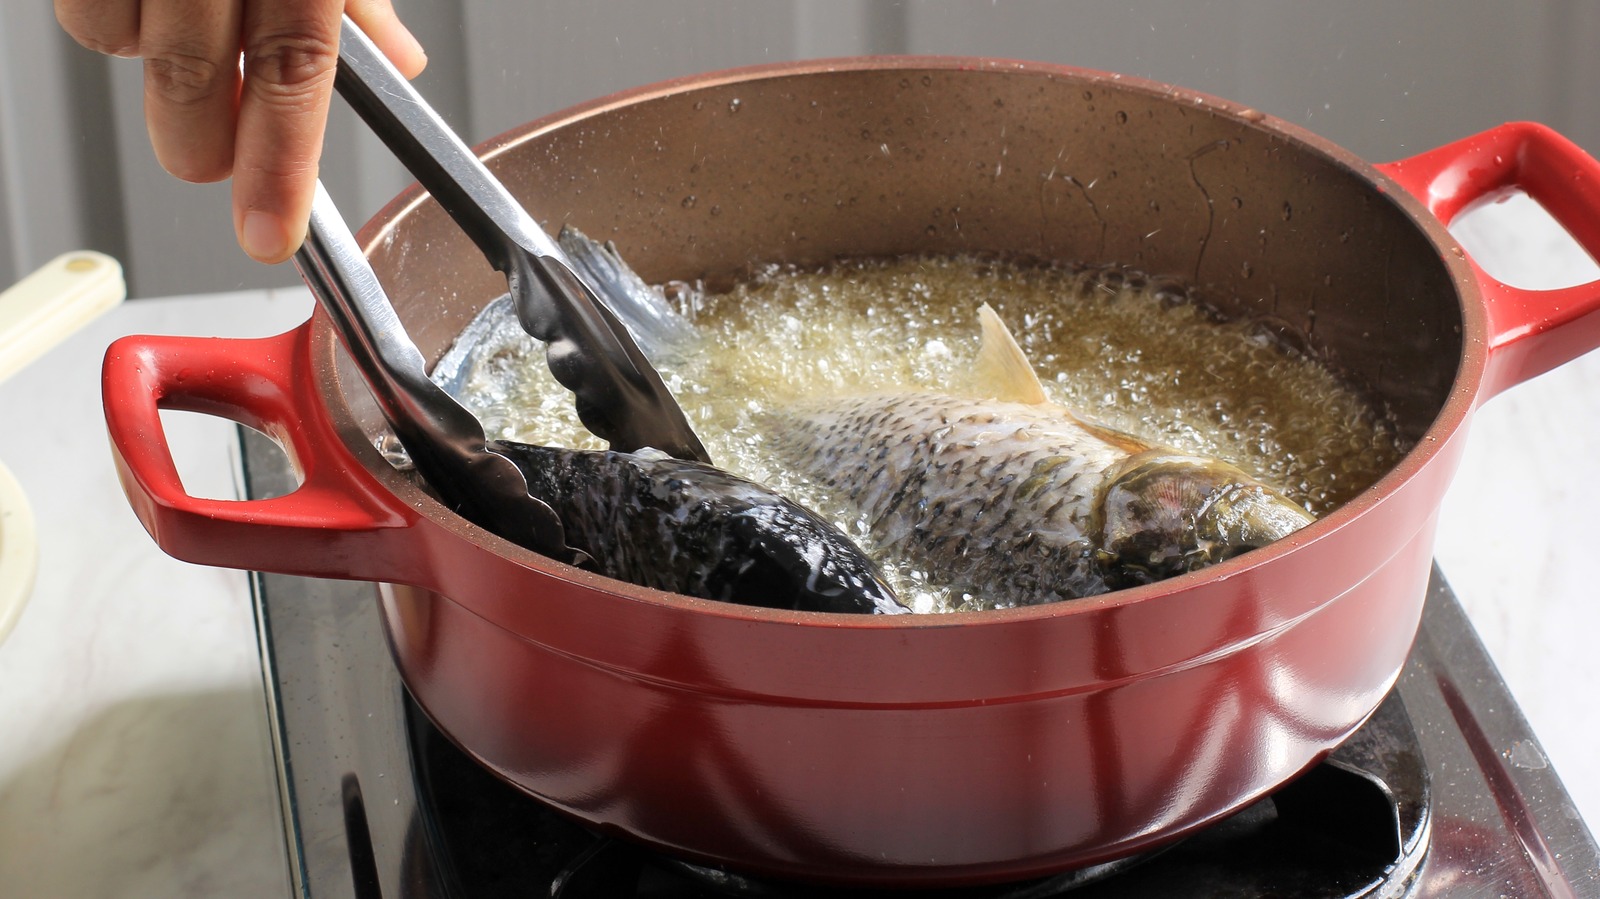 The Proper Way to Reuse Oil After Frying Fish